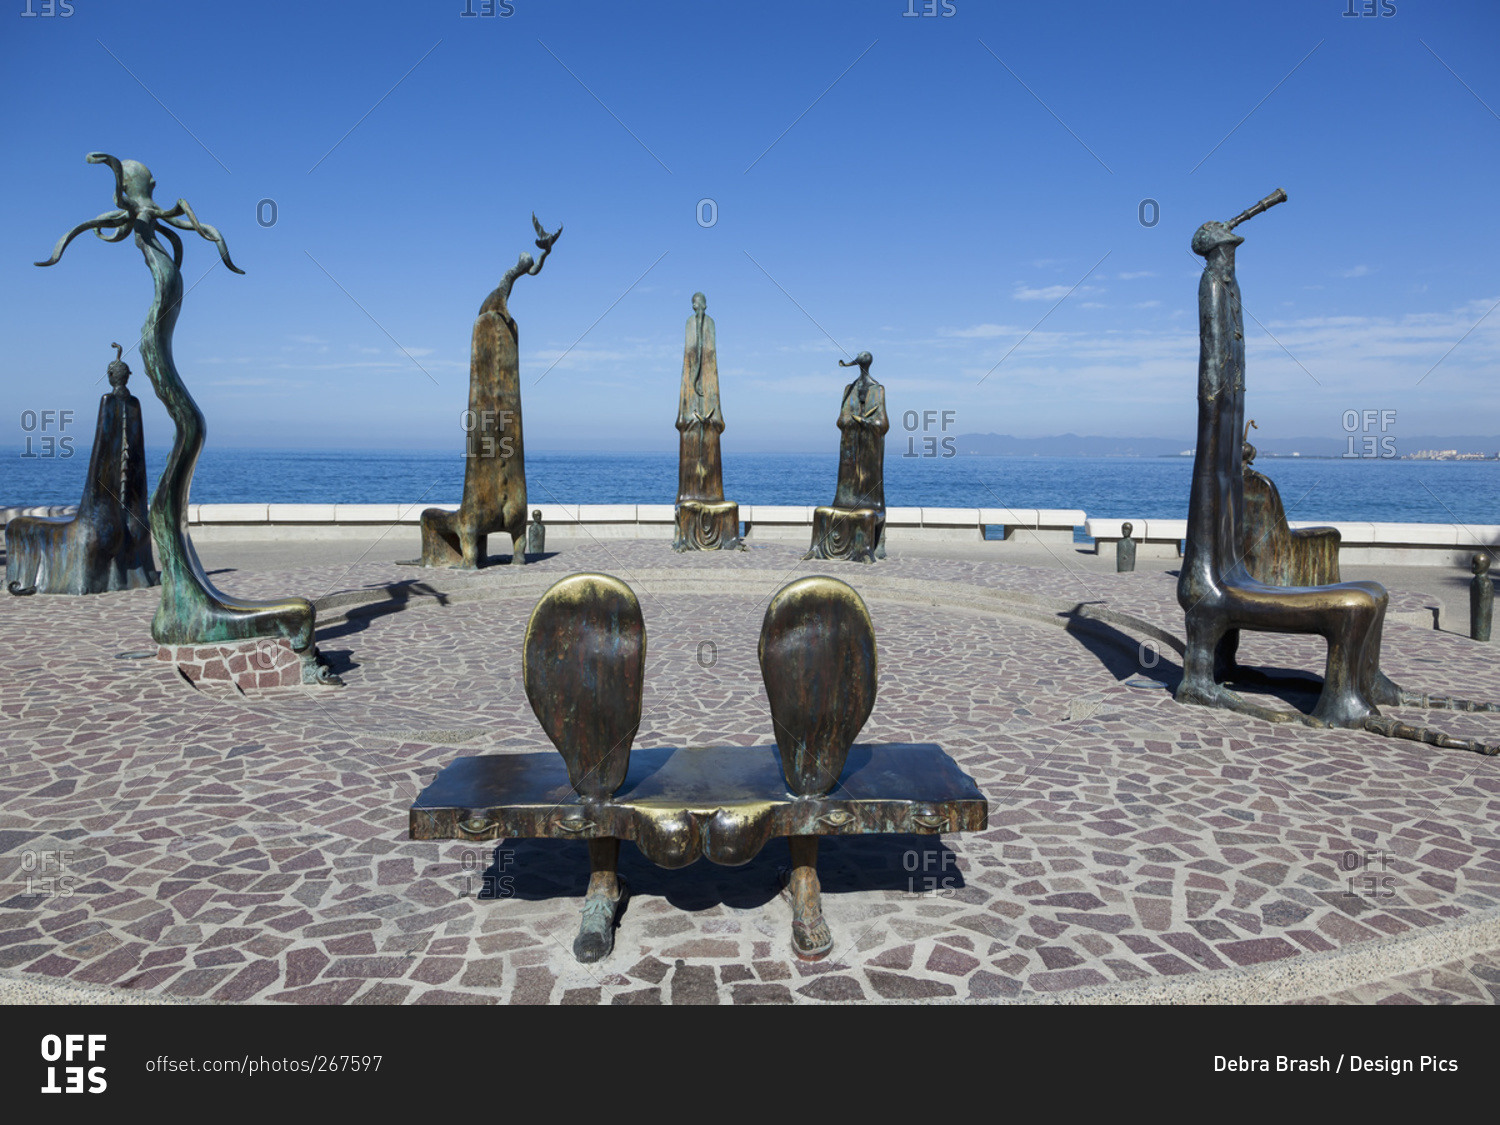 The rotunda of the sea is one of the popular sculptures on the Malecon, Puerto Vallarta, Mexico